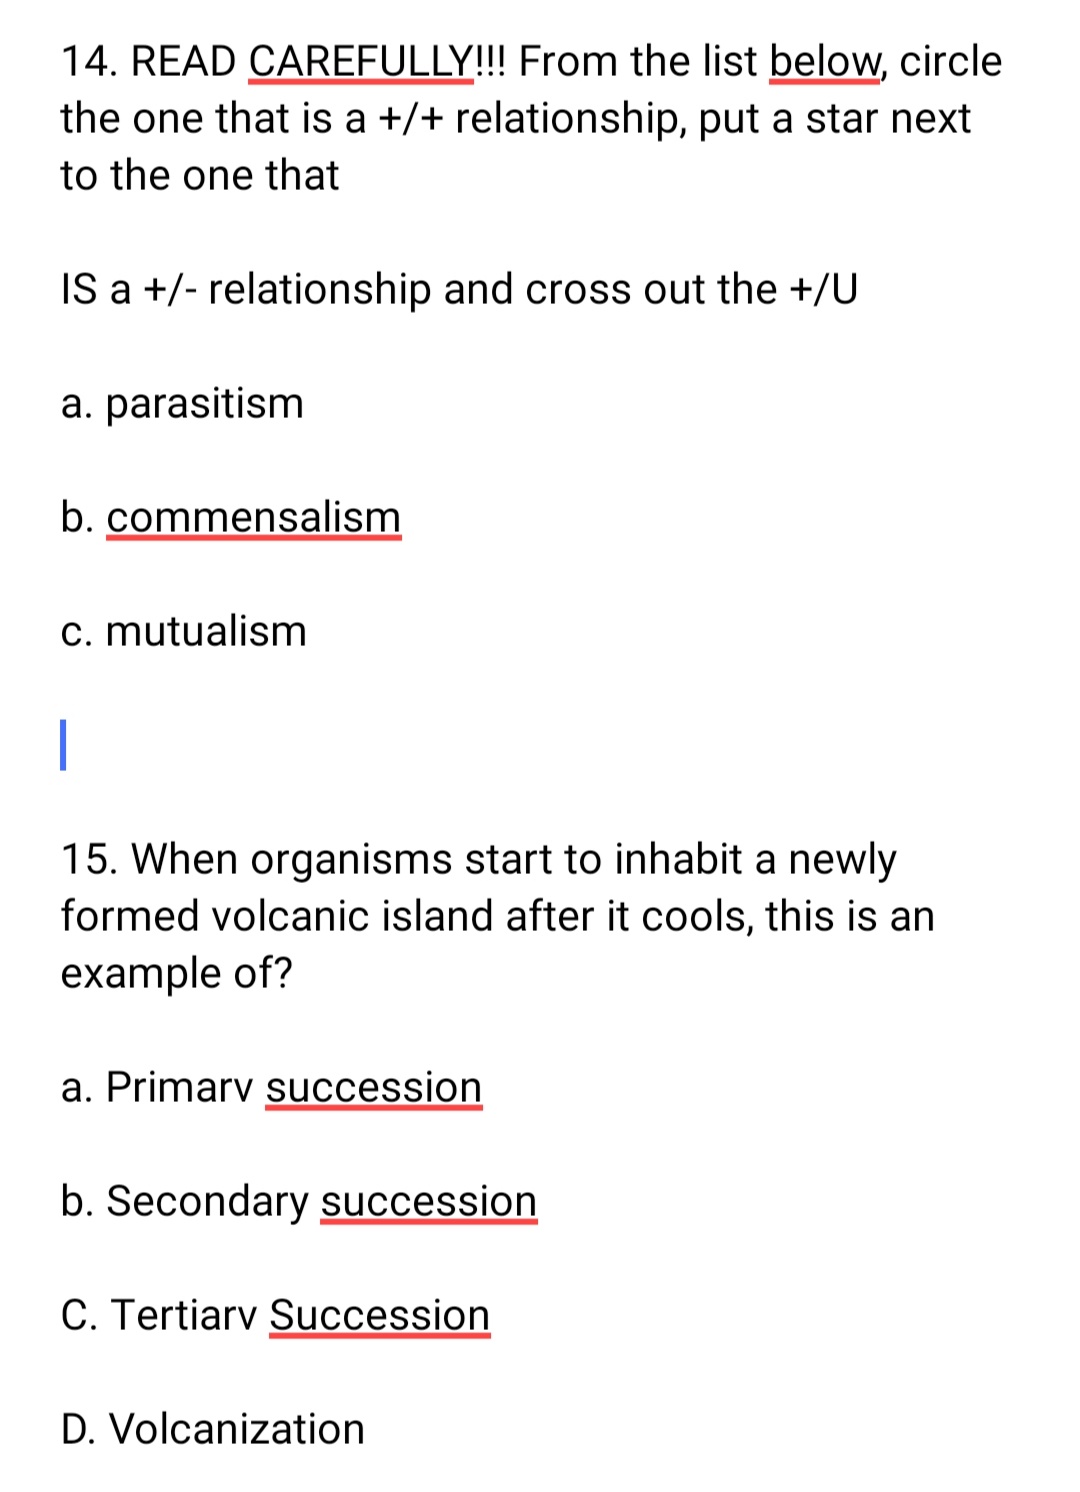 14. READ CAREFULLY!!! From the list below, circle
the one that is a +/+ relationship, put a star next
to the one that
IS a +/- relationship and cross out the +/U
a. parasitism
b. commensalism
c. mutualism
|
15. When organisms start to inhabit a newly
formed volcanic island after it cools, this is an
example of?
a. Primary succession
b. Secondary succession
C. Tertiary Succession
D. Volcanization